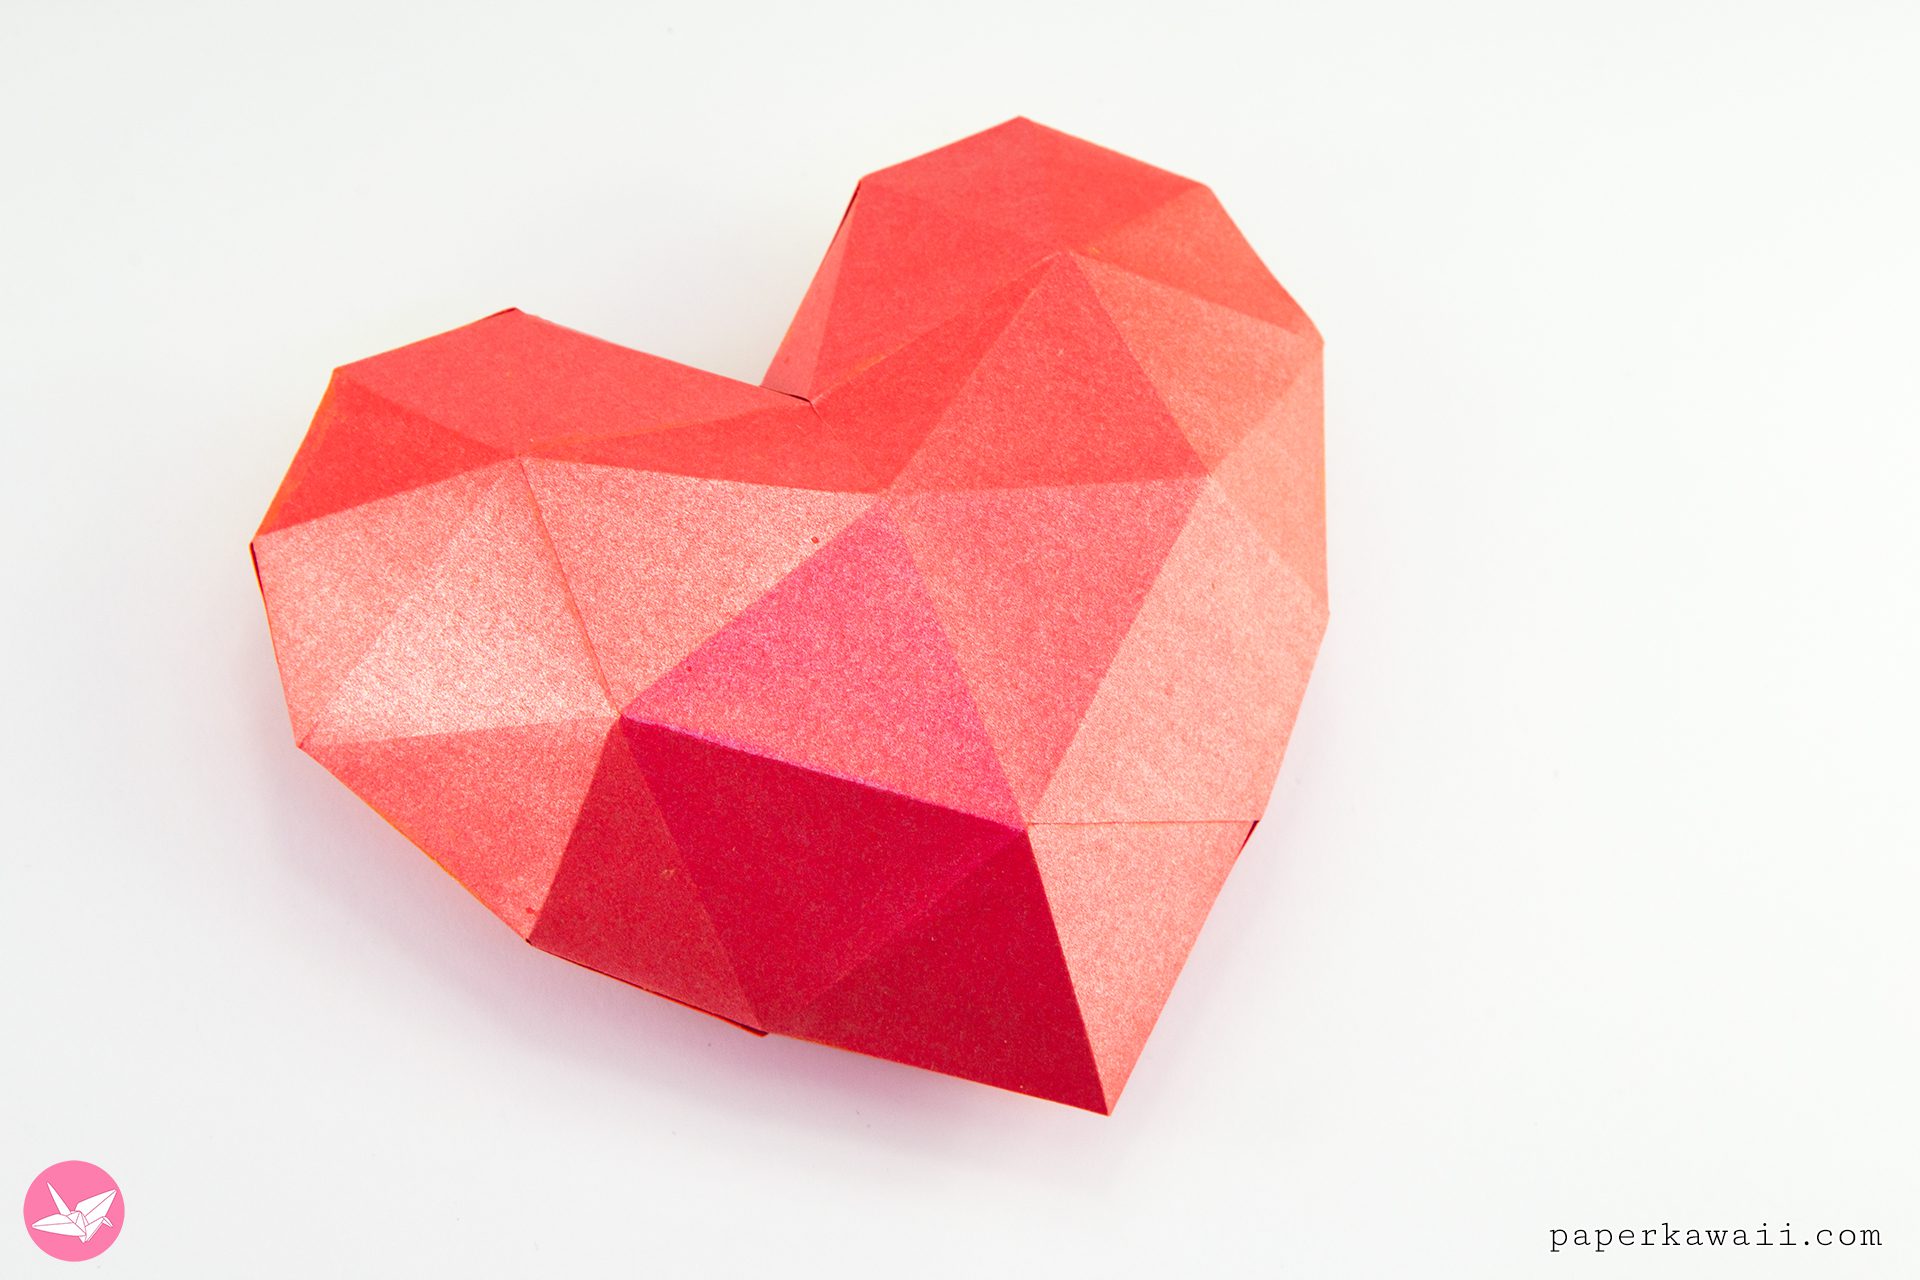 Two It Yourself: How to make 3D paper hearts for Valentine's Day